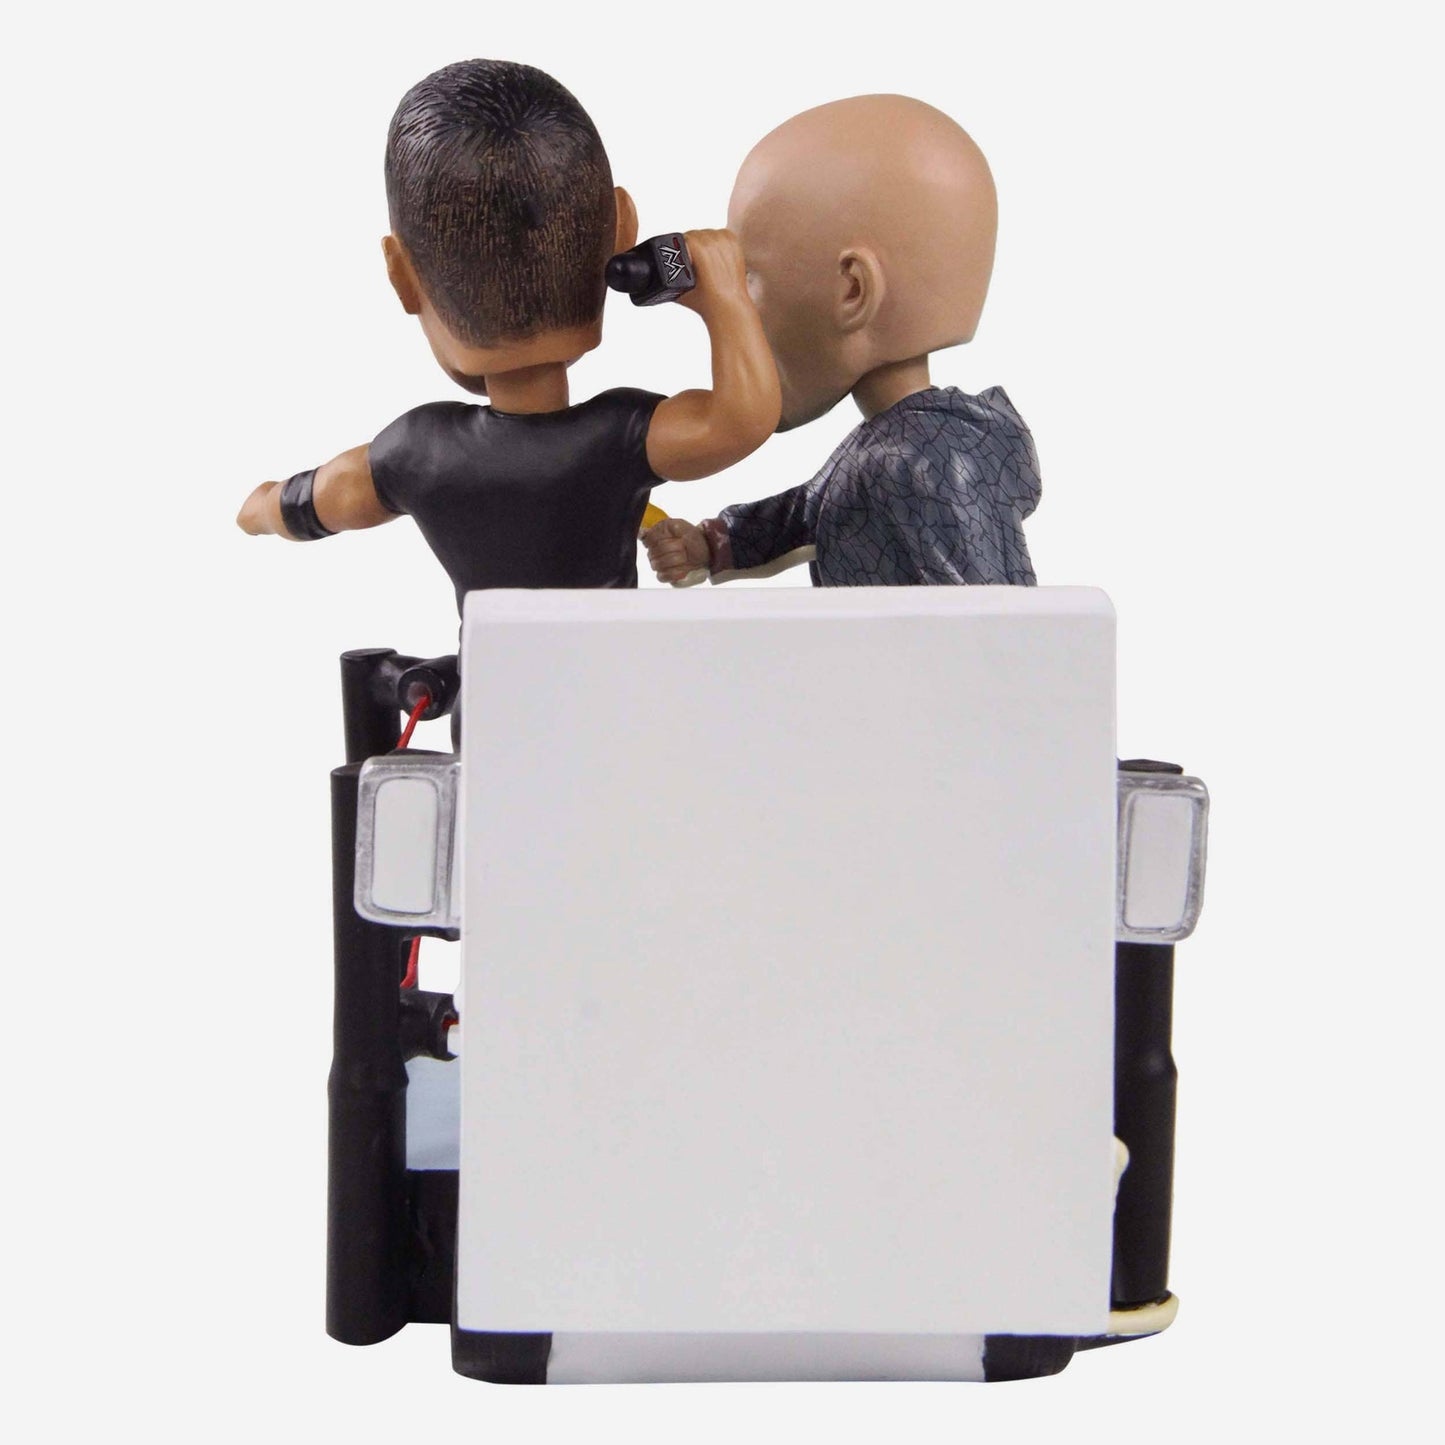 2023 WWE FOCO Bobbleheads Limited Edition Stone Cold Steve Austin vs. The Rock